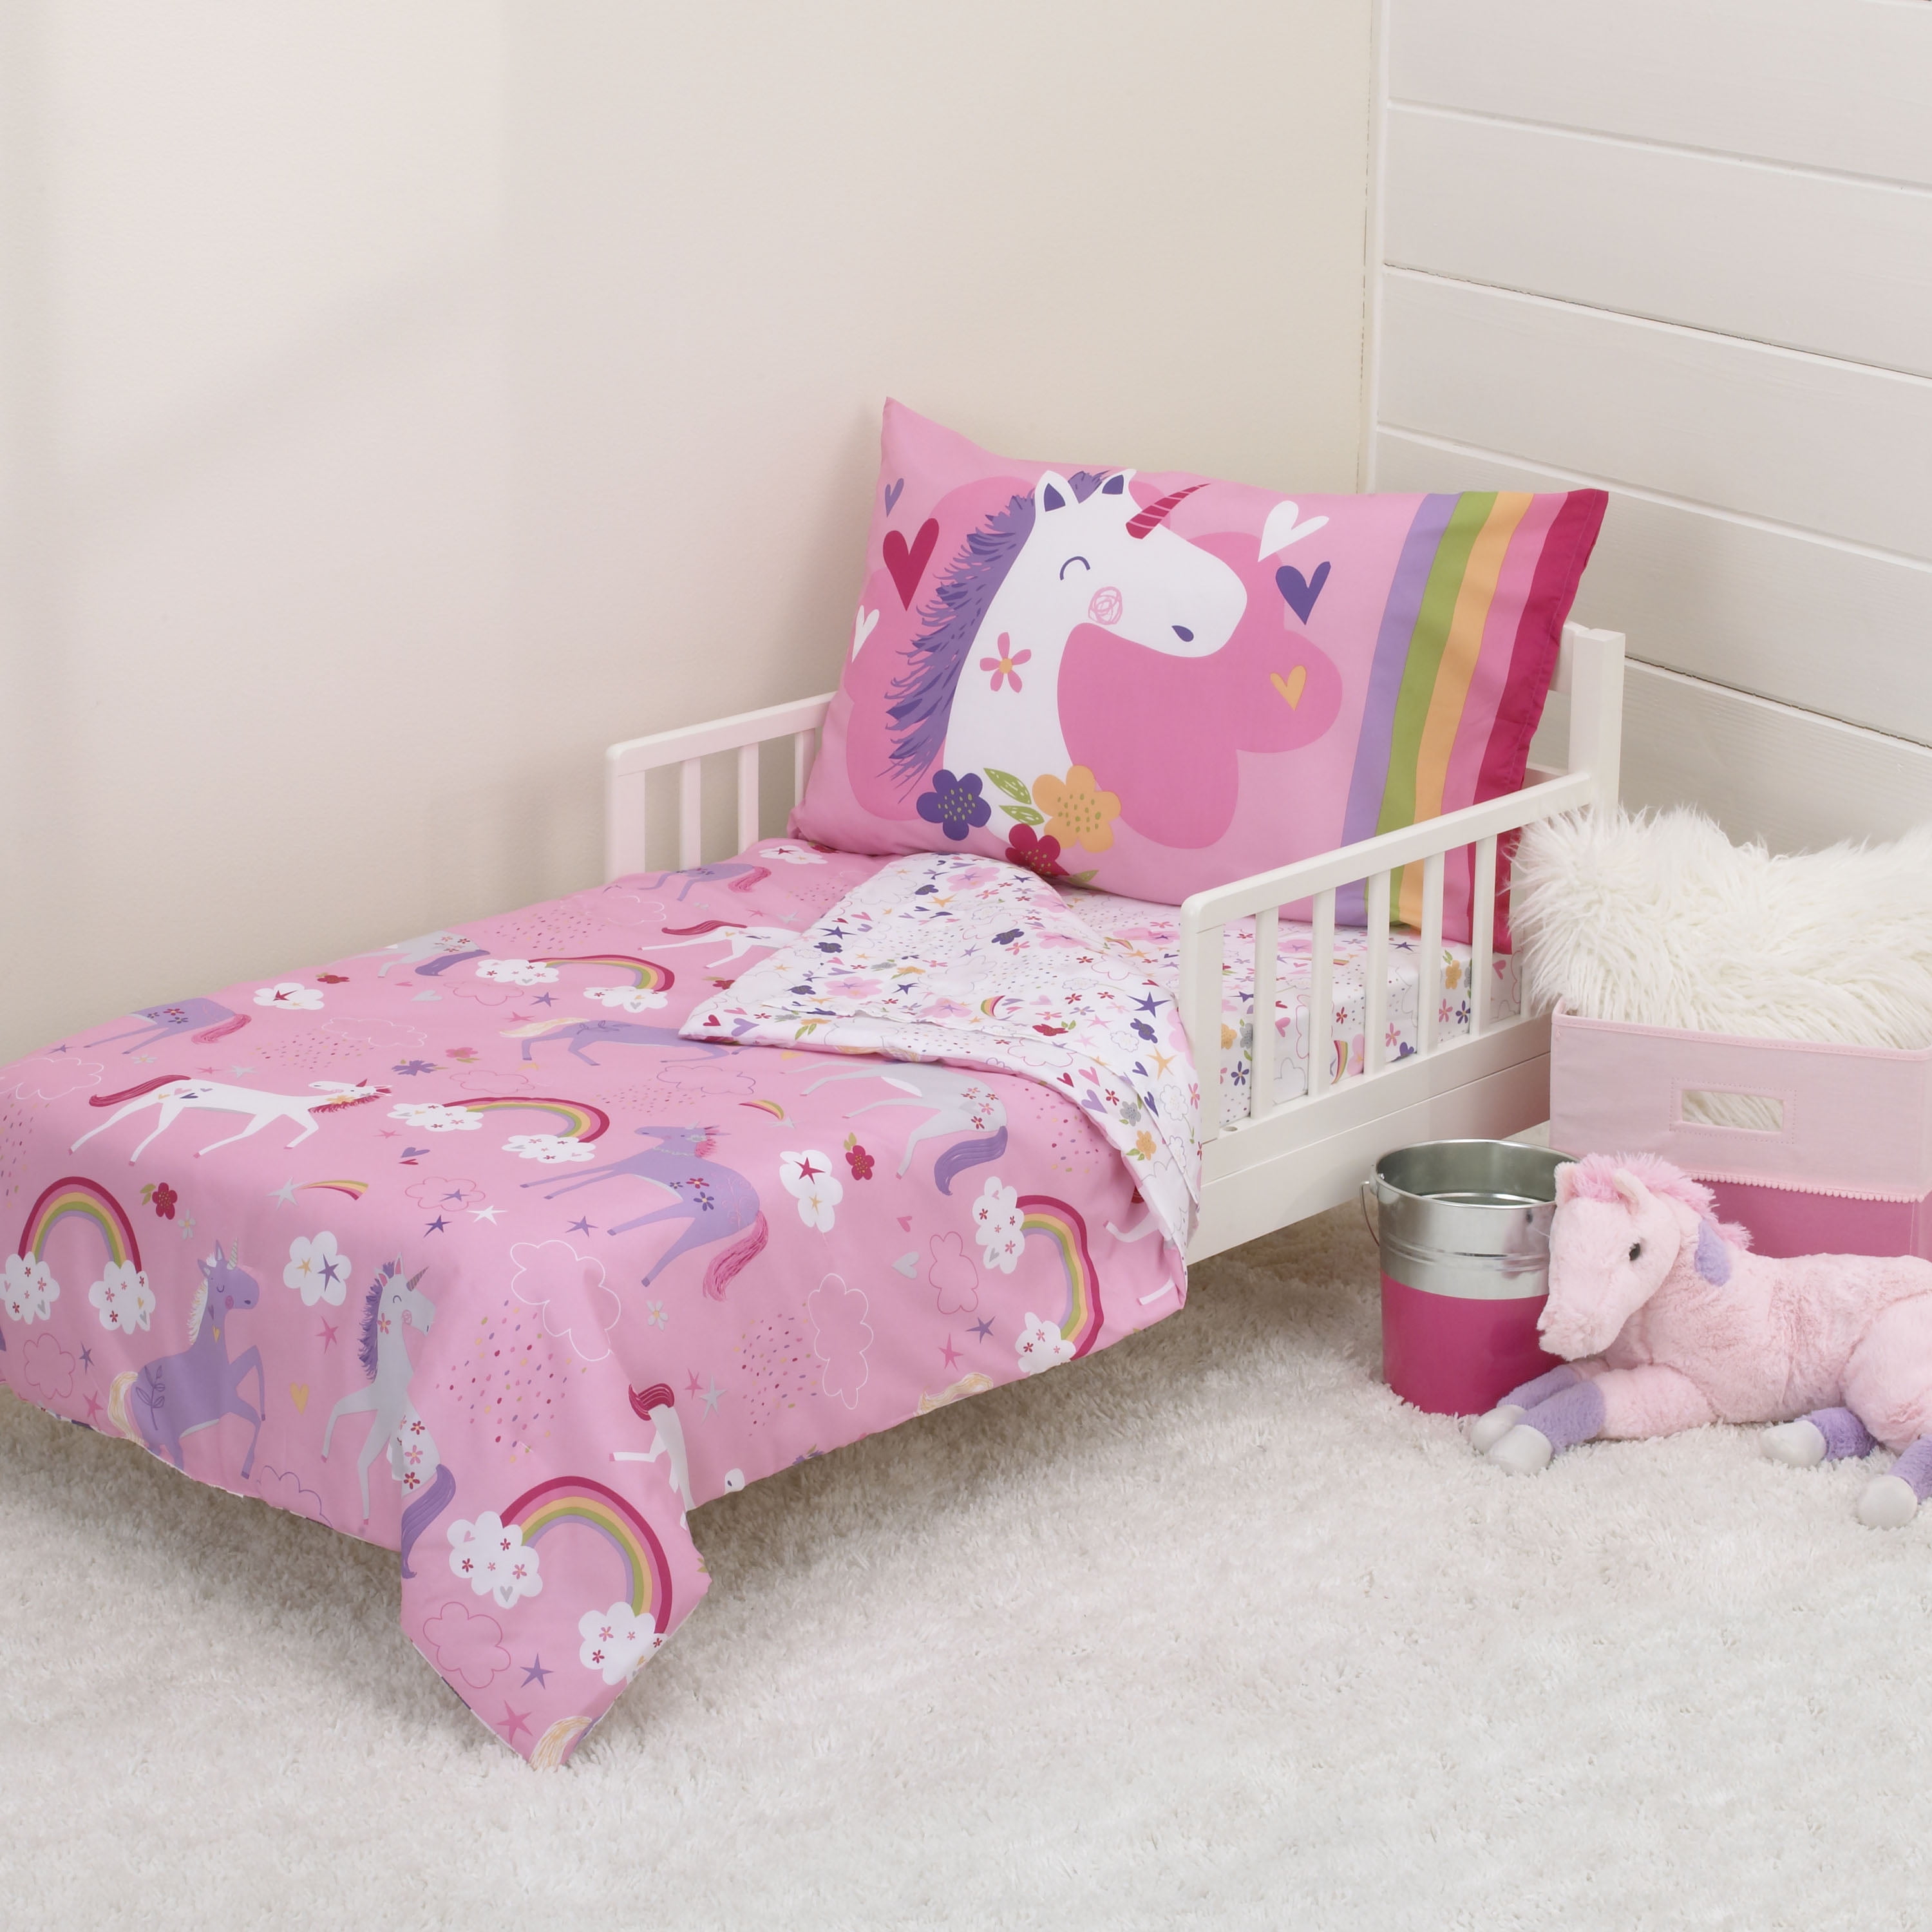 Pillow & Covers Cot Bed Duvet Peppa Pig Stardust 4-in-1 Toddler Bedding Set 